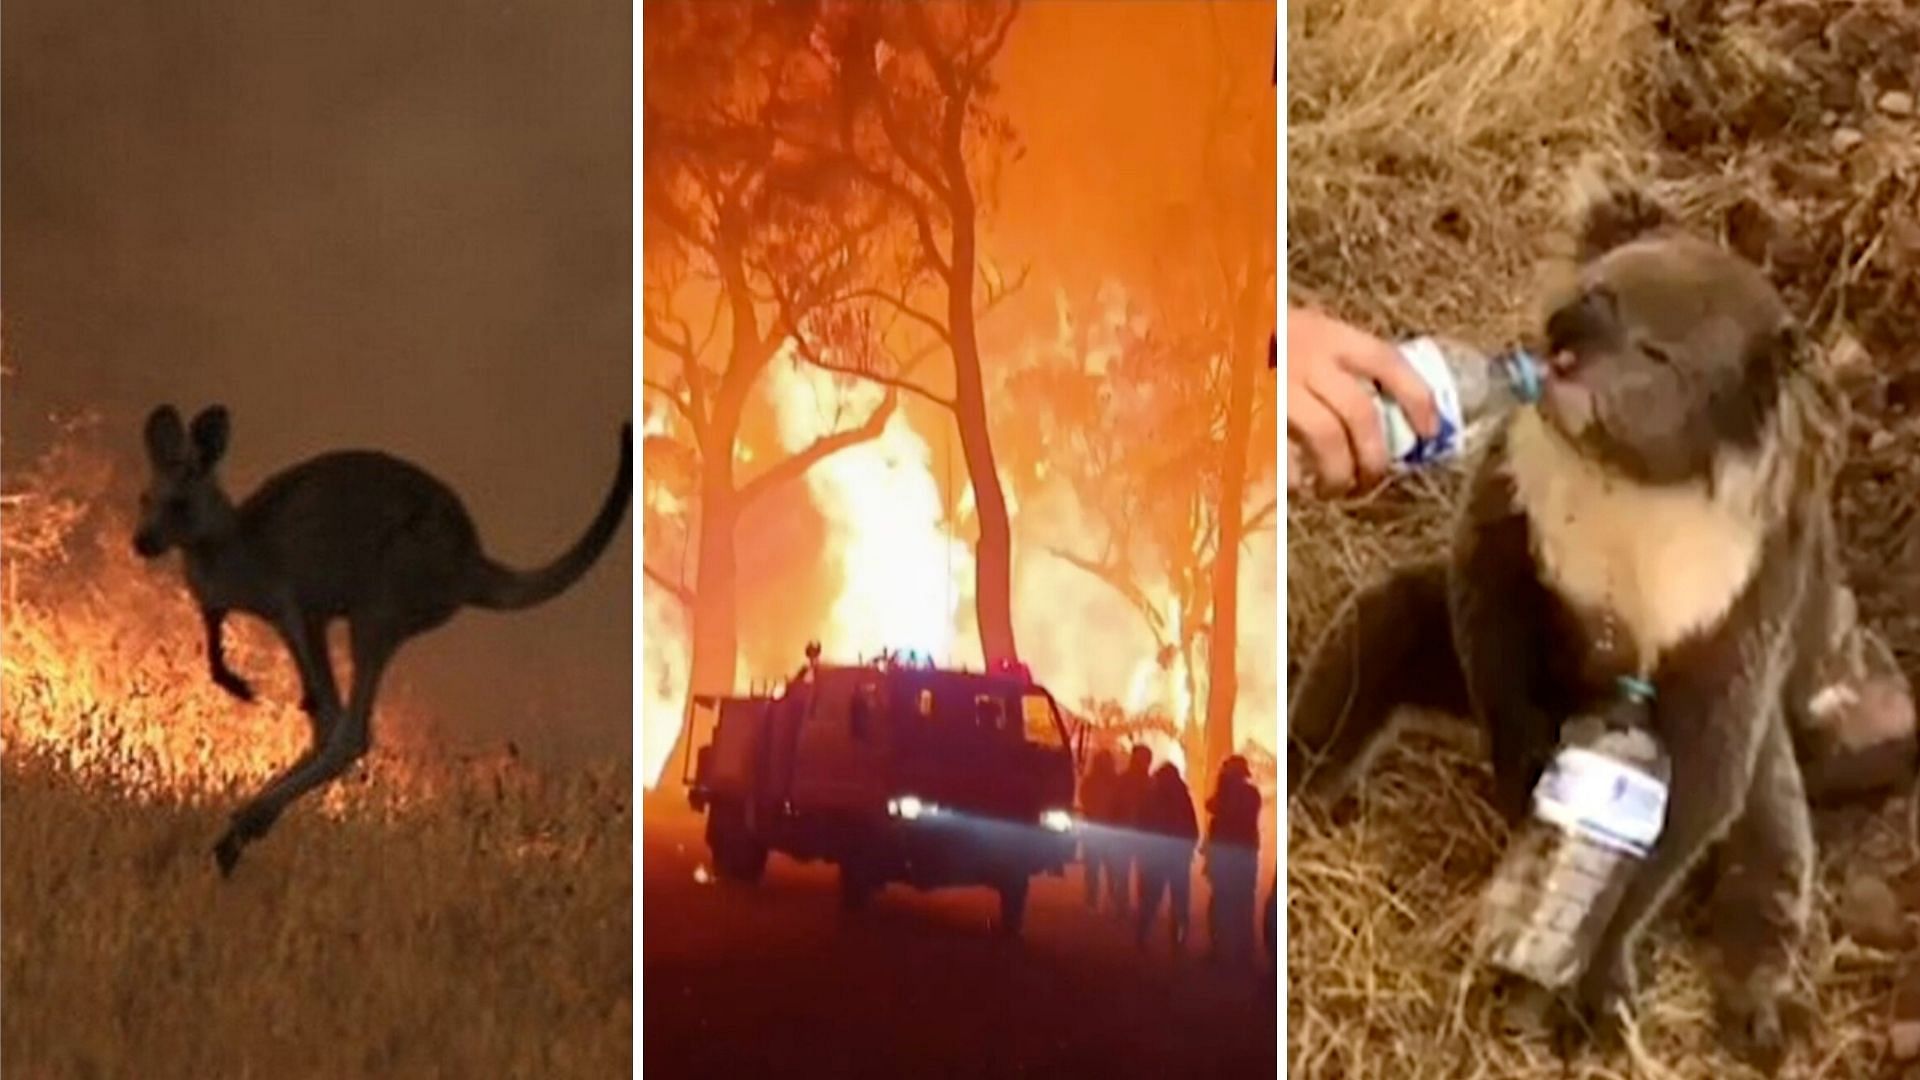 Thanks to rampant deforestation and soaring temperature, Australia is witnessing the worst-ever wildfire in decades.